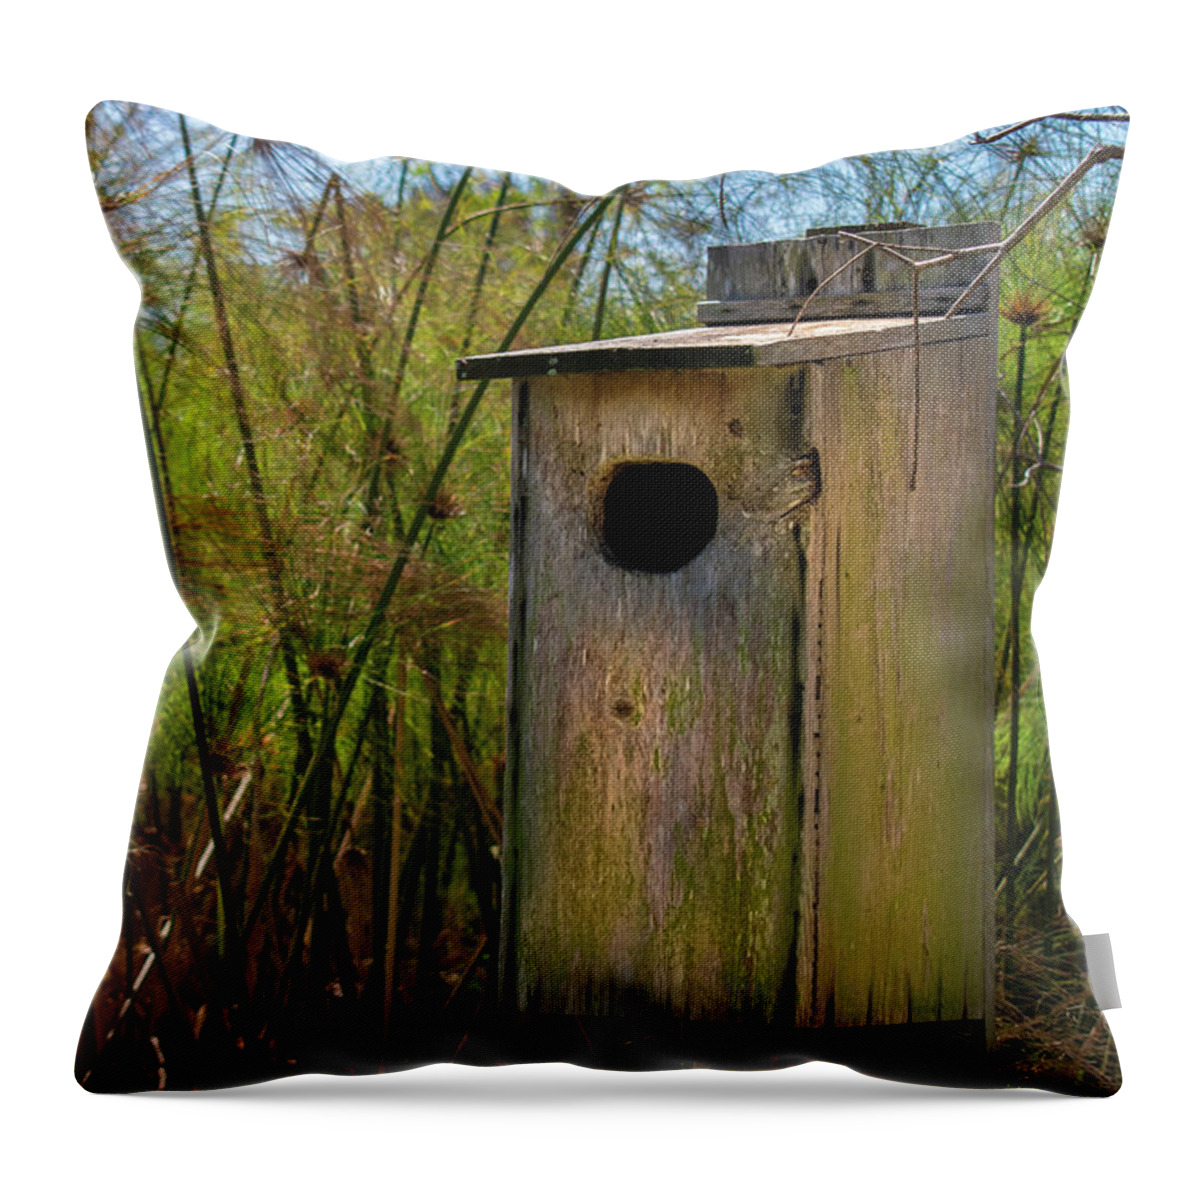 Ahomeinthecountry Throw Pillow featuring the photograph A Home in the Country by Vicky Edgerly